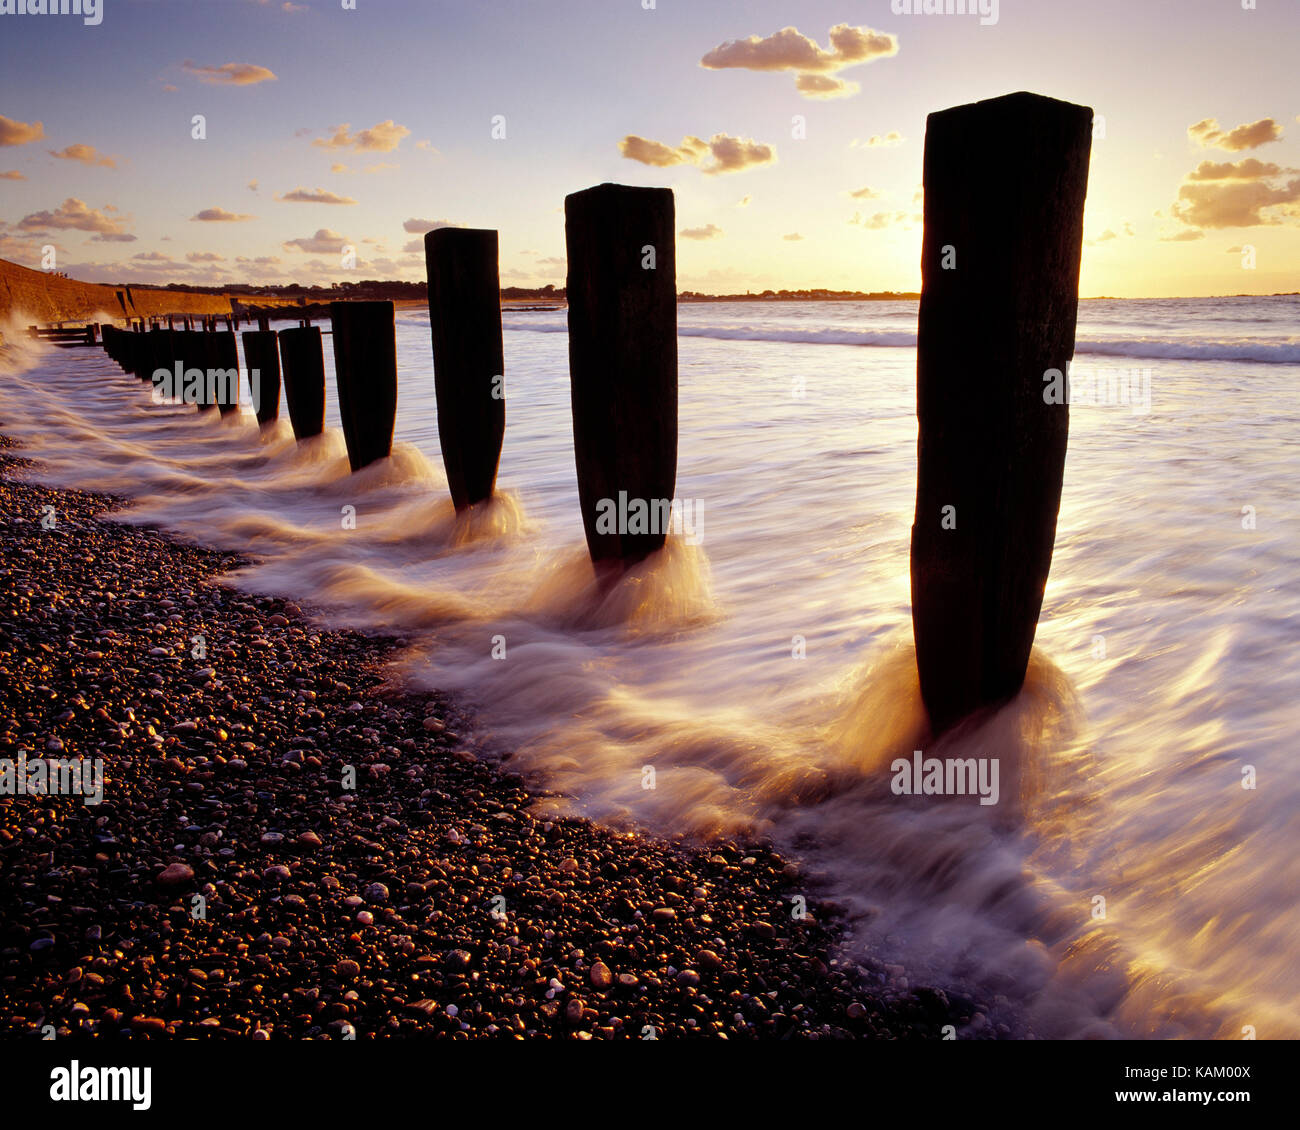 Channel Islands. Guernsey. Vazon Bay. Waves on seashore with wooden groynes. Stock Photo